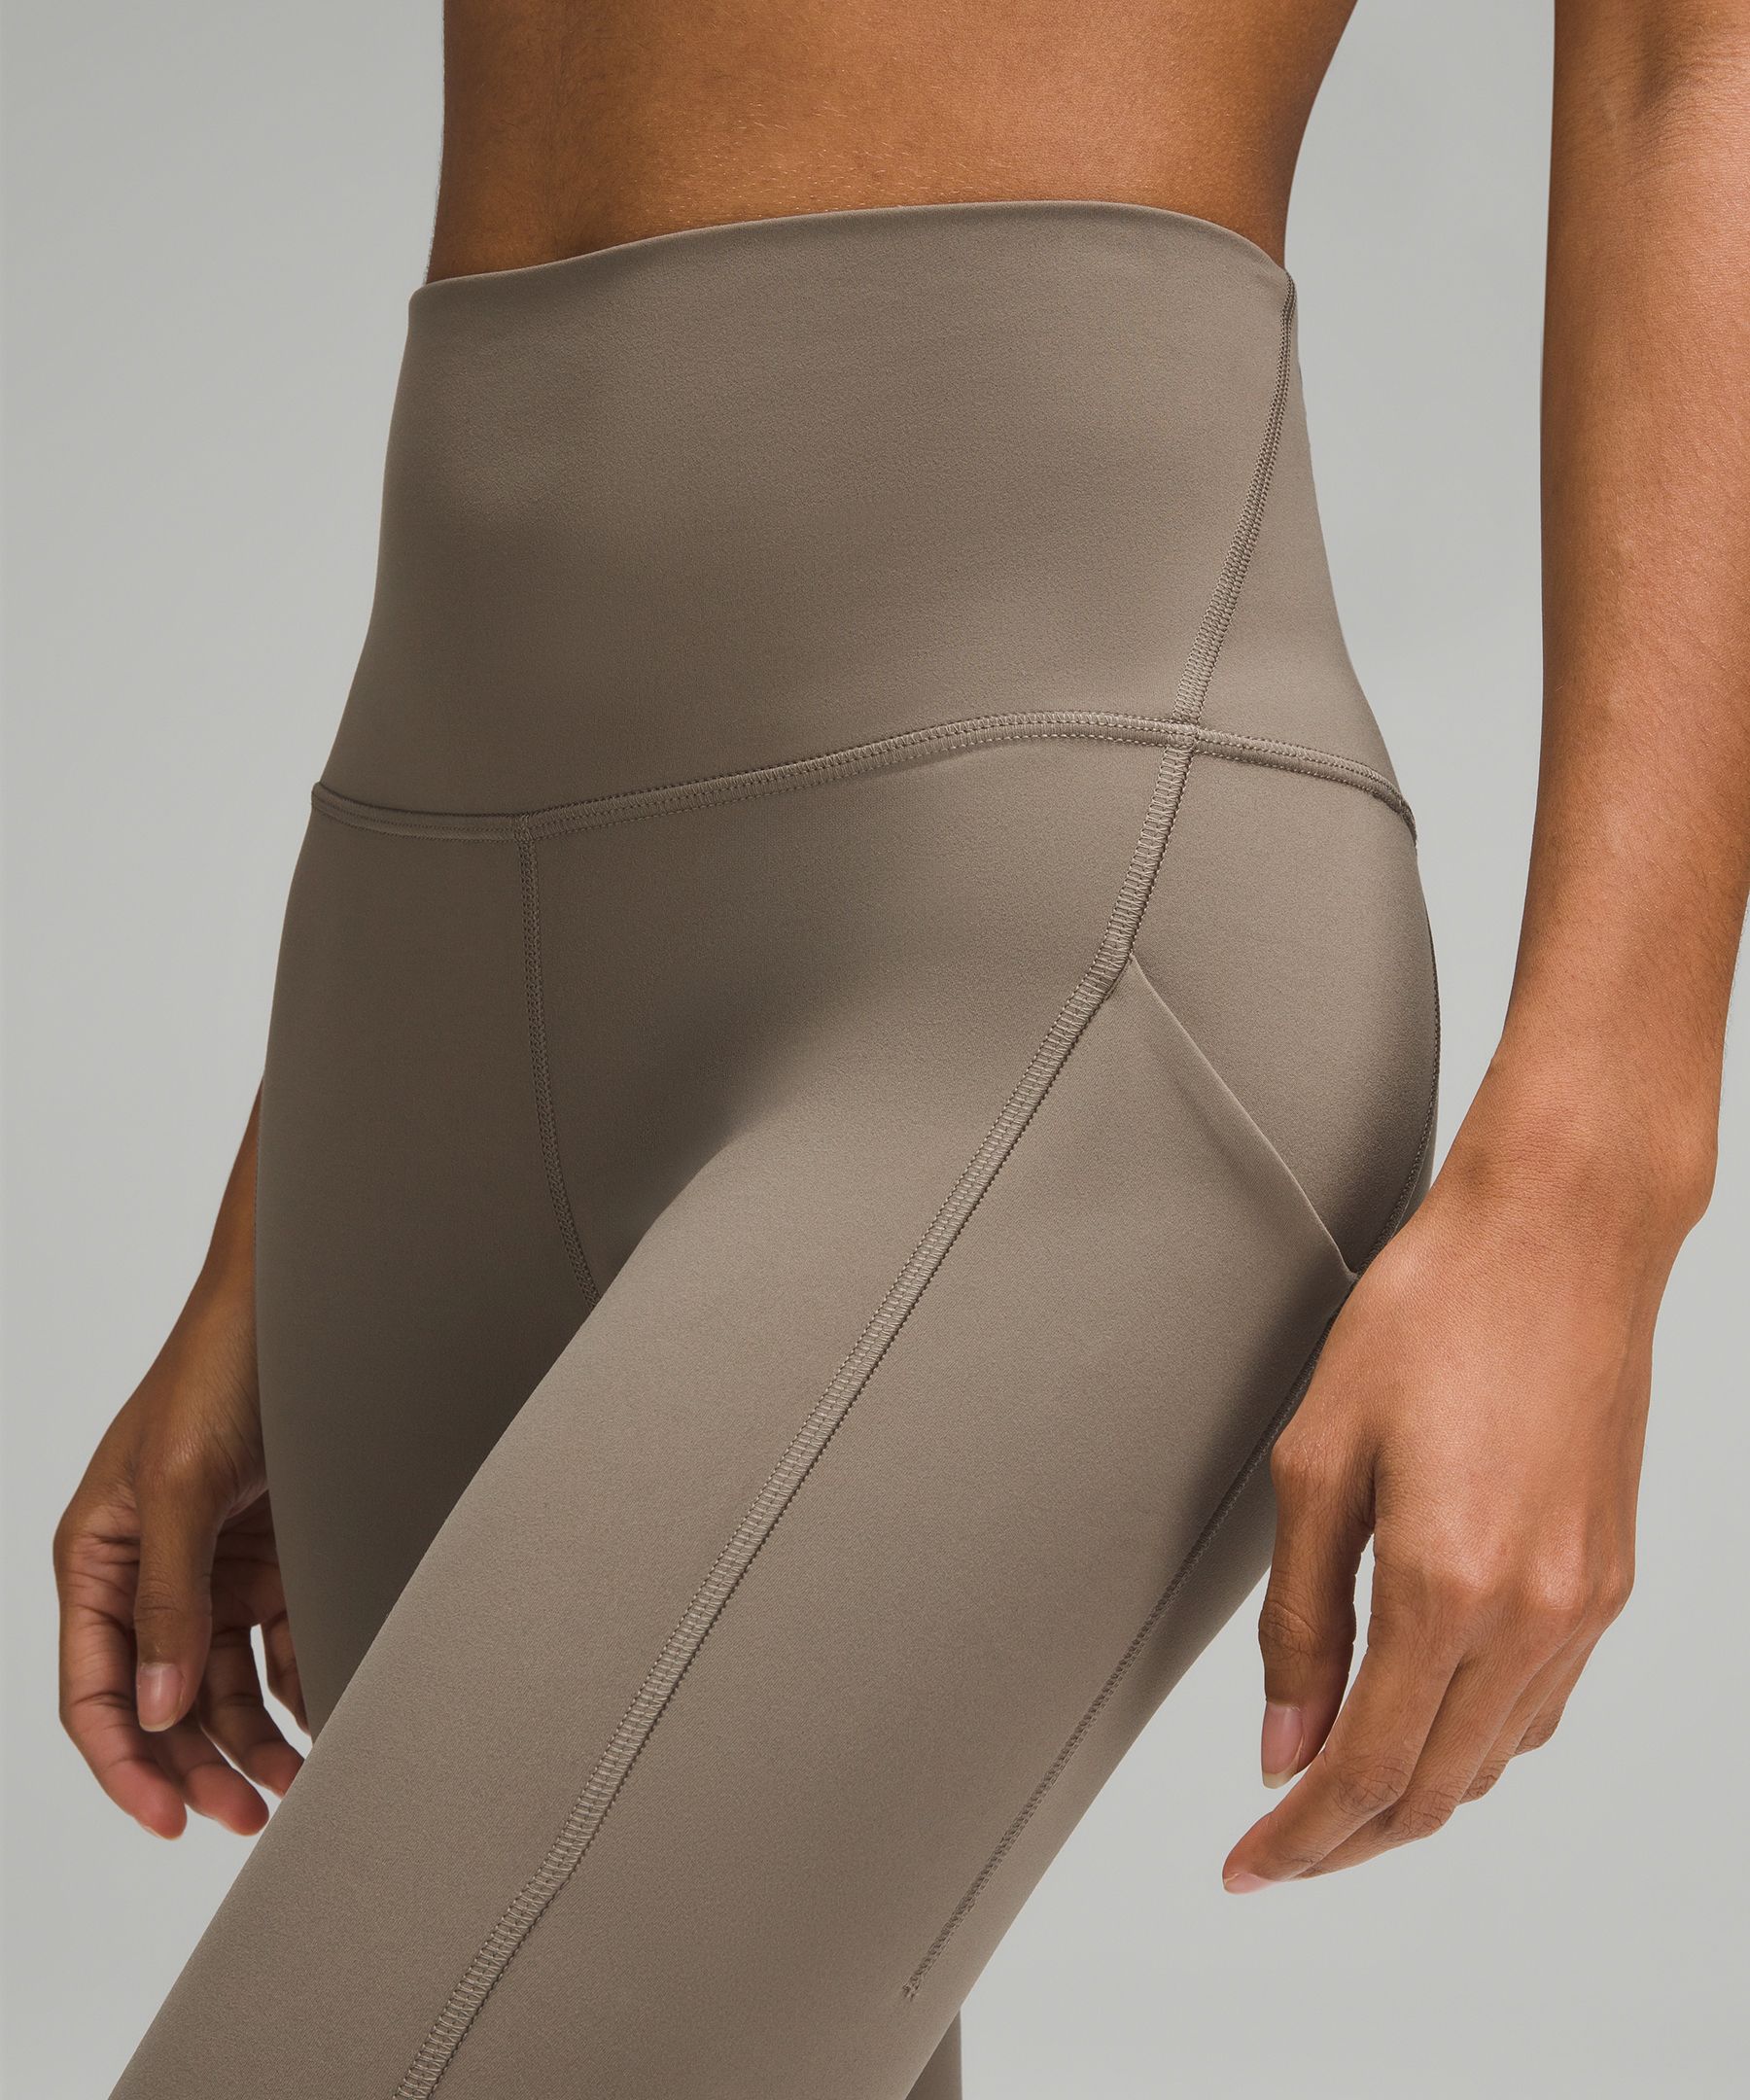 lululemon Align™ High-Rise Crop with Pockets 23